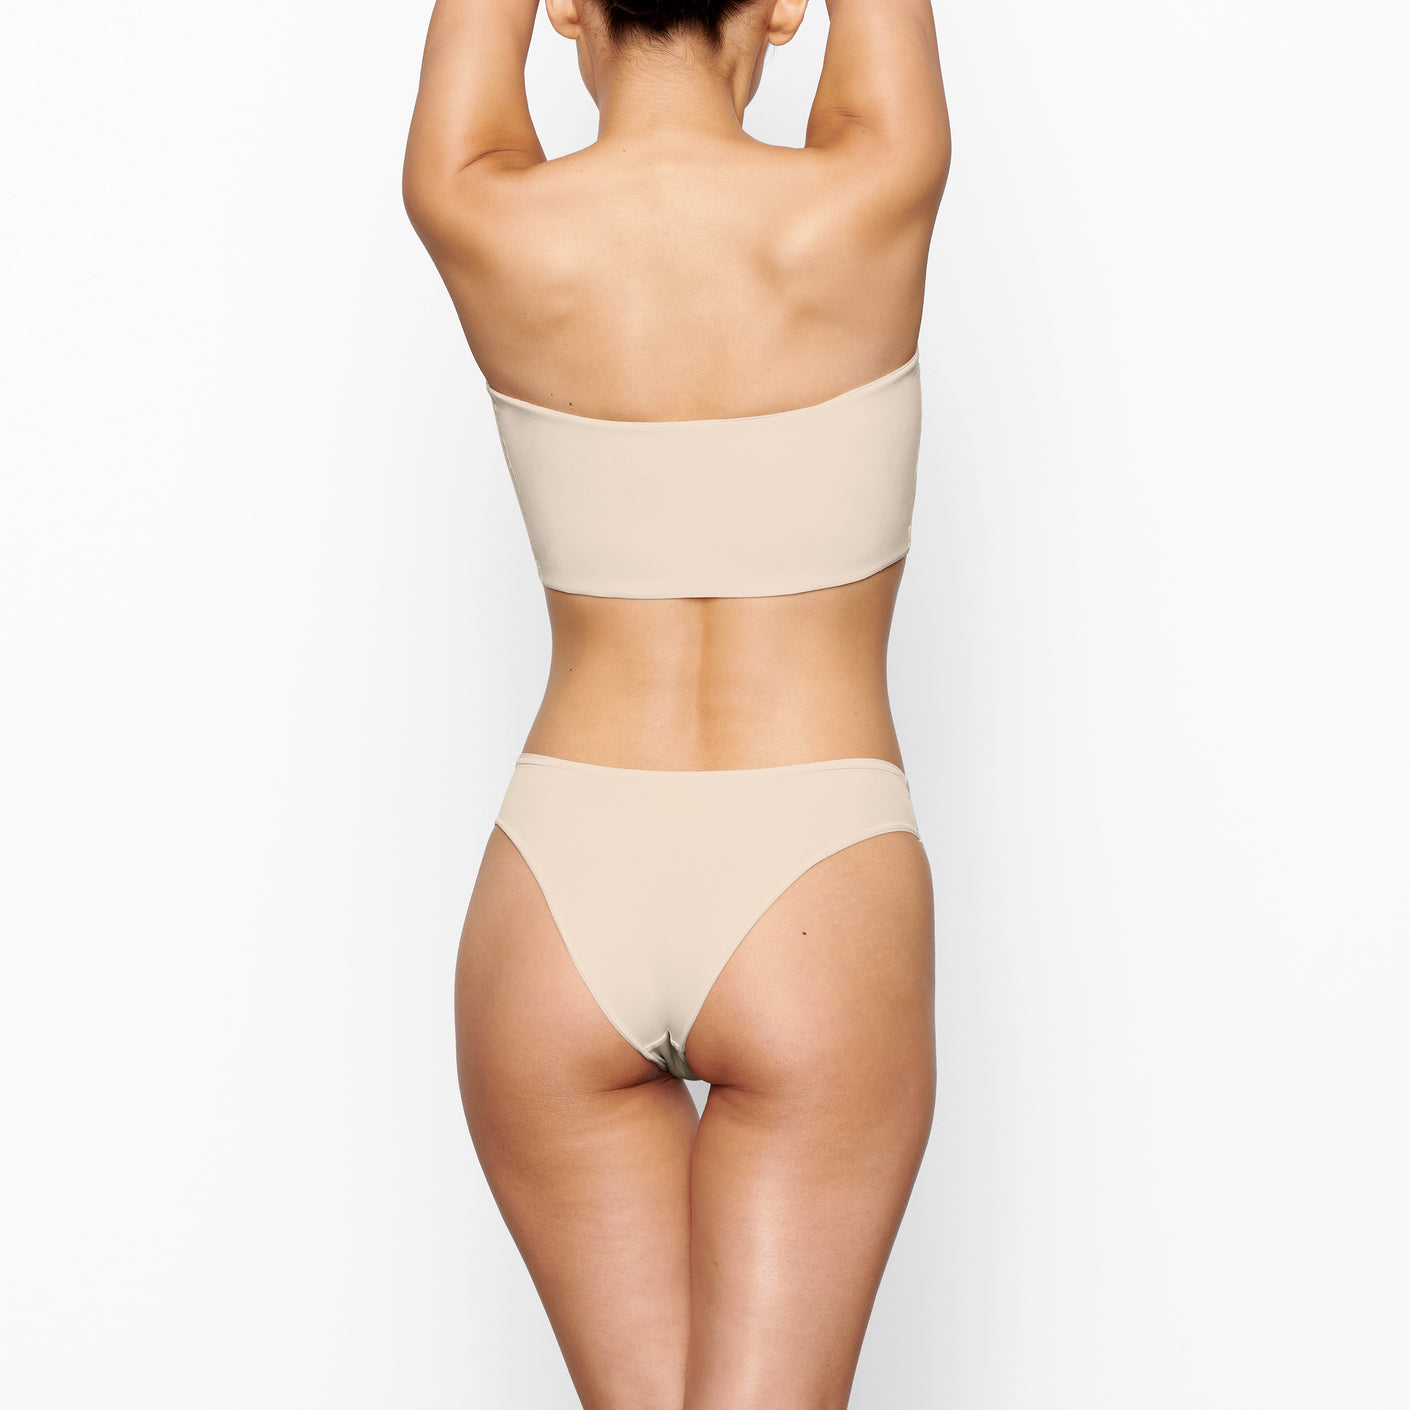 SKIMS Fits Everybody Bandeau in Sienna XS - $35 New With Tags - From Matilda